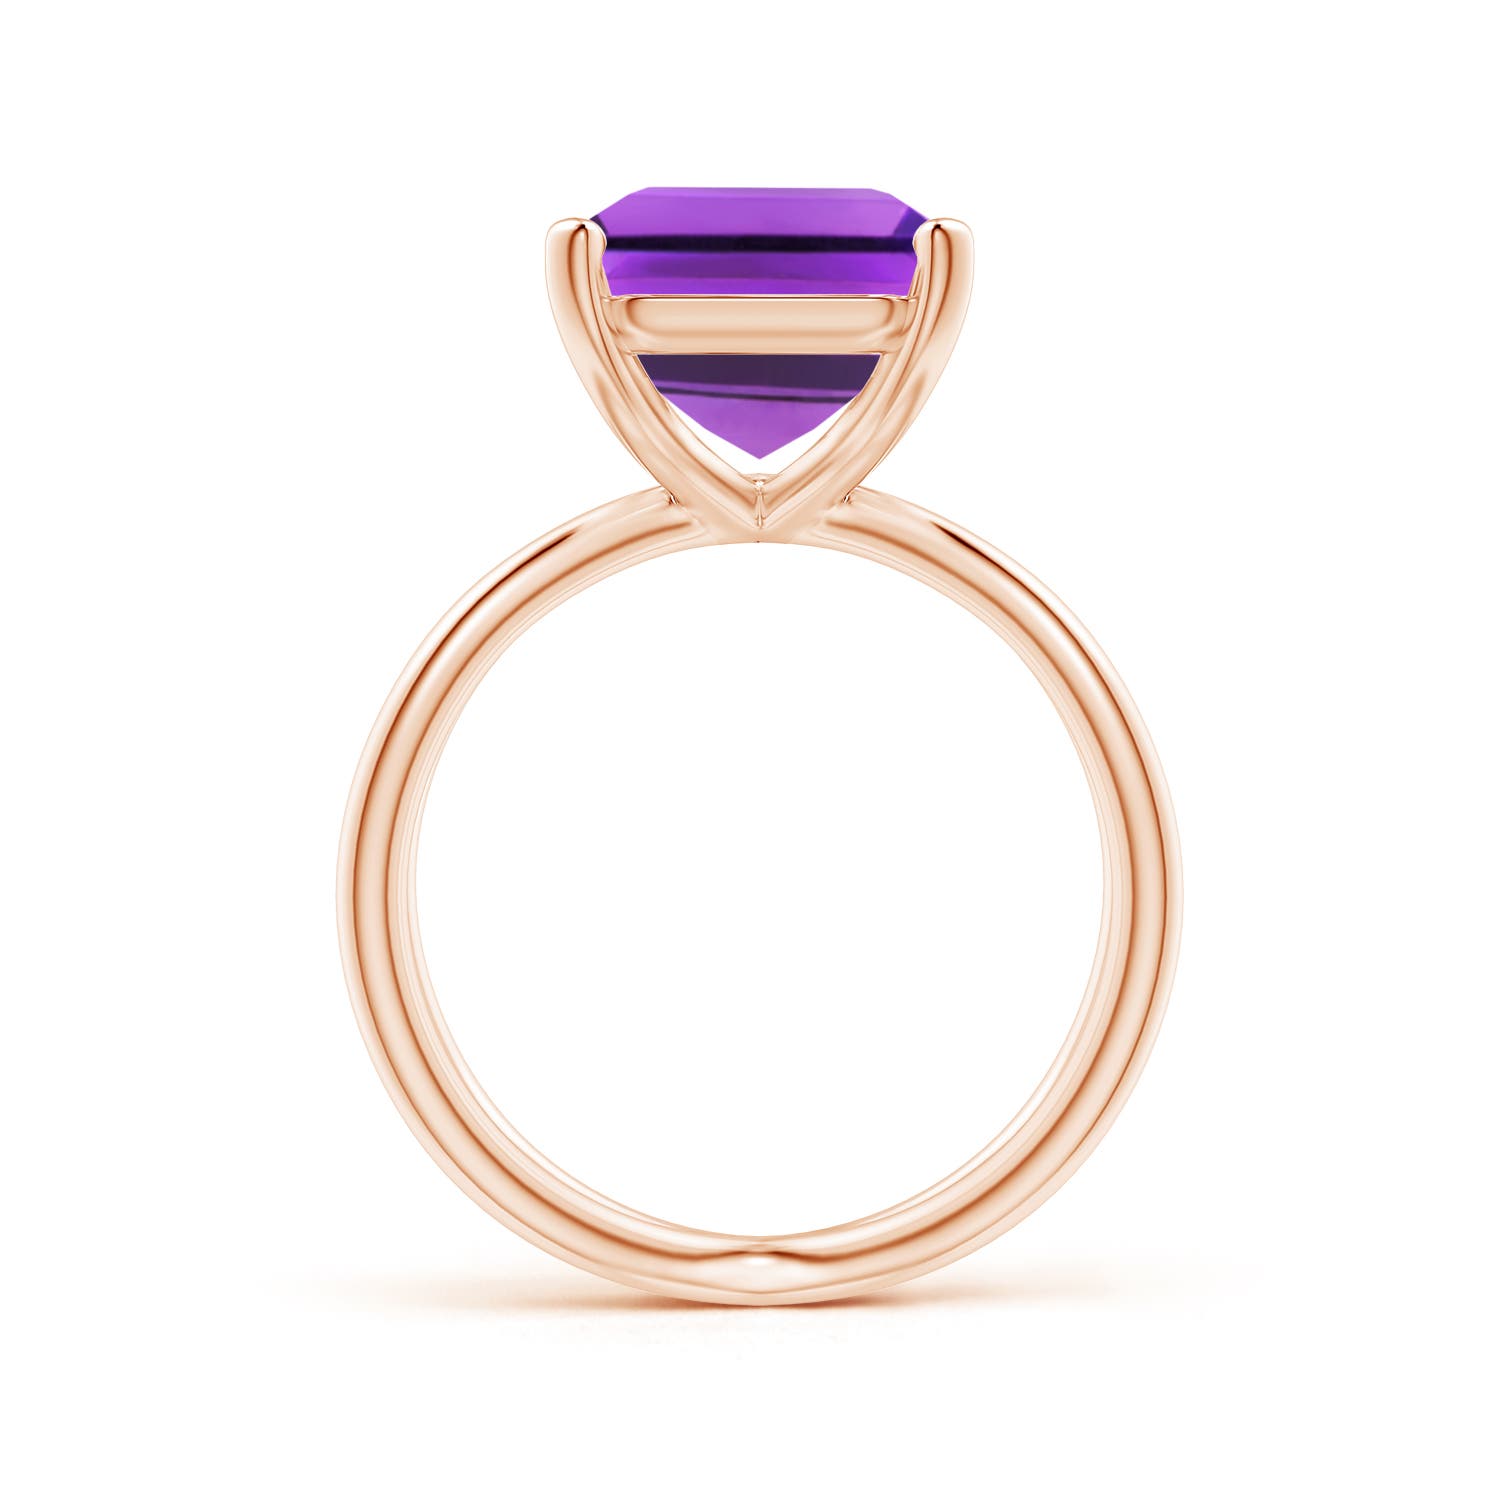 AAA - Amethyst / 6.5 CT / 14 KT Rose Gold